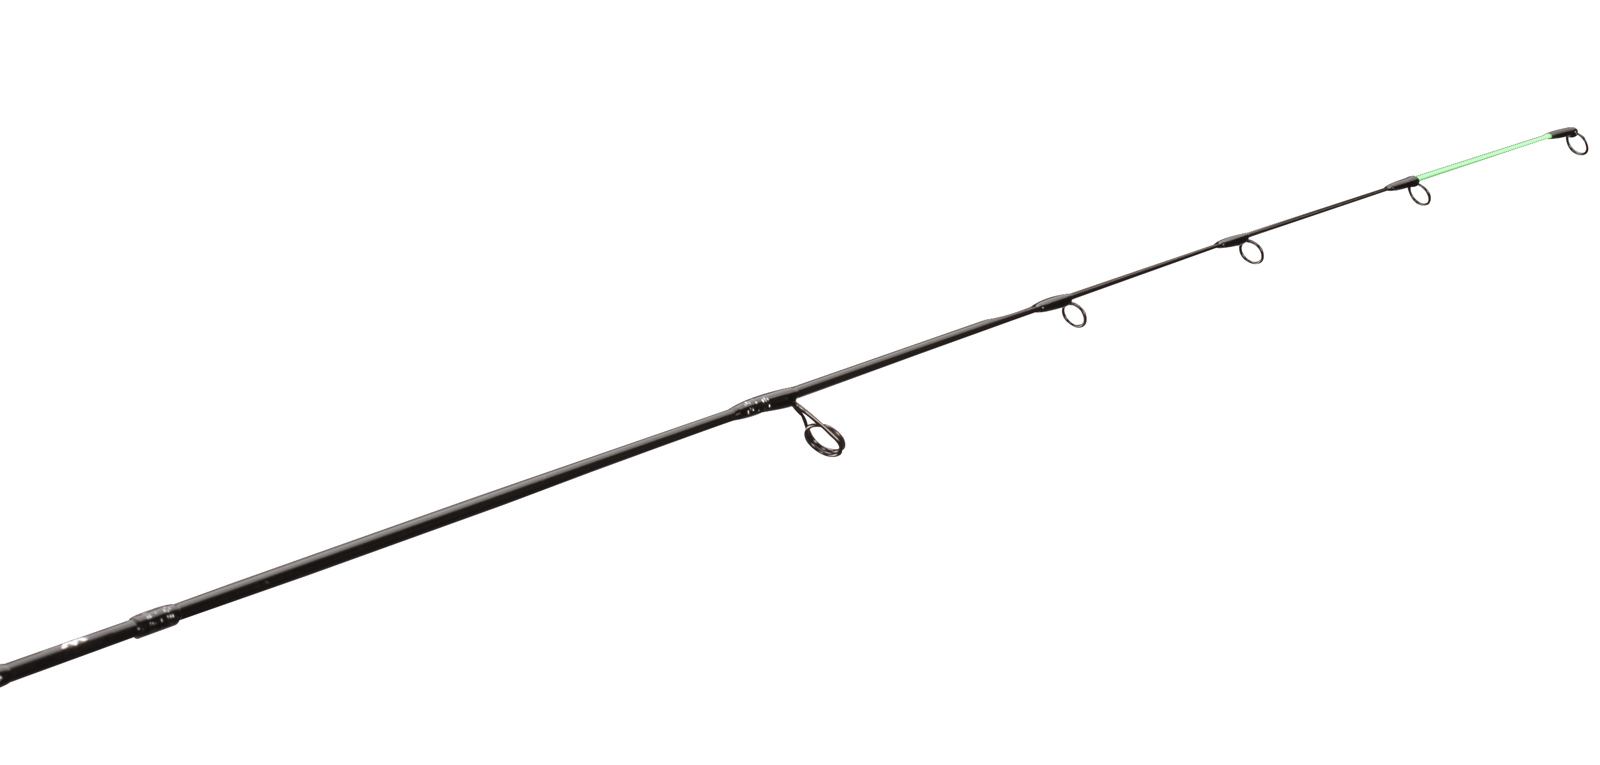 13 Fishing Widow Maker Ice Rod - Tennessee Handle - Tickle Stick Tip